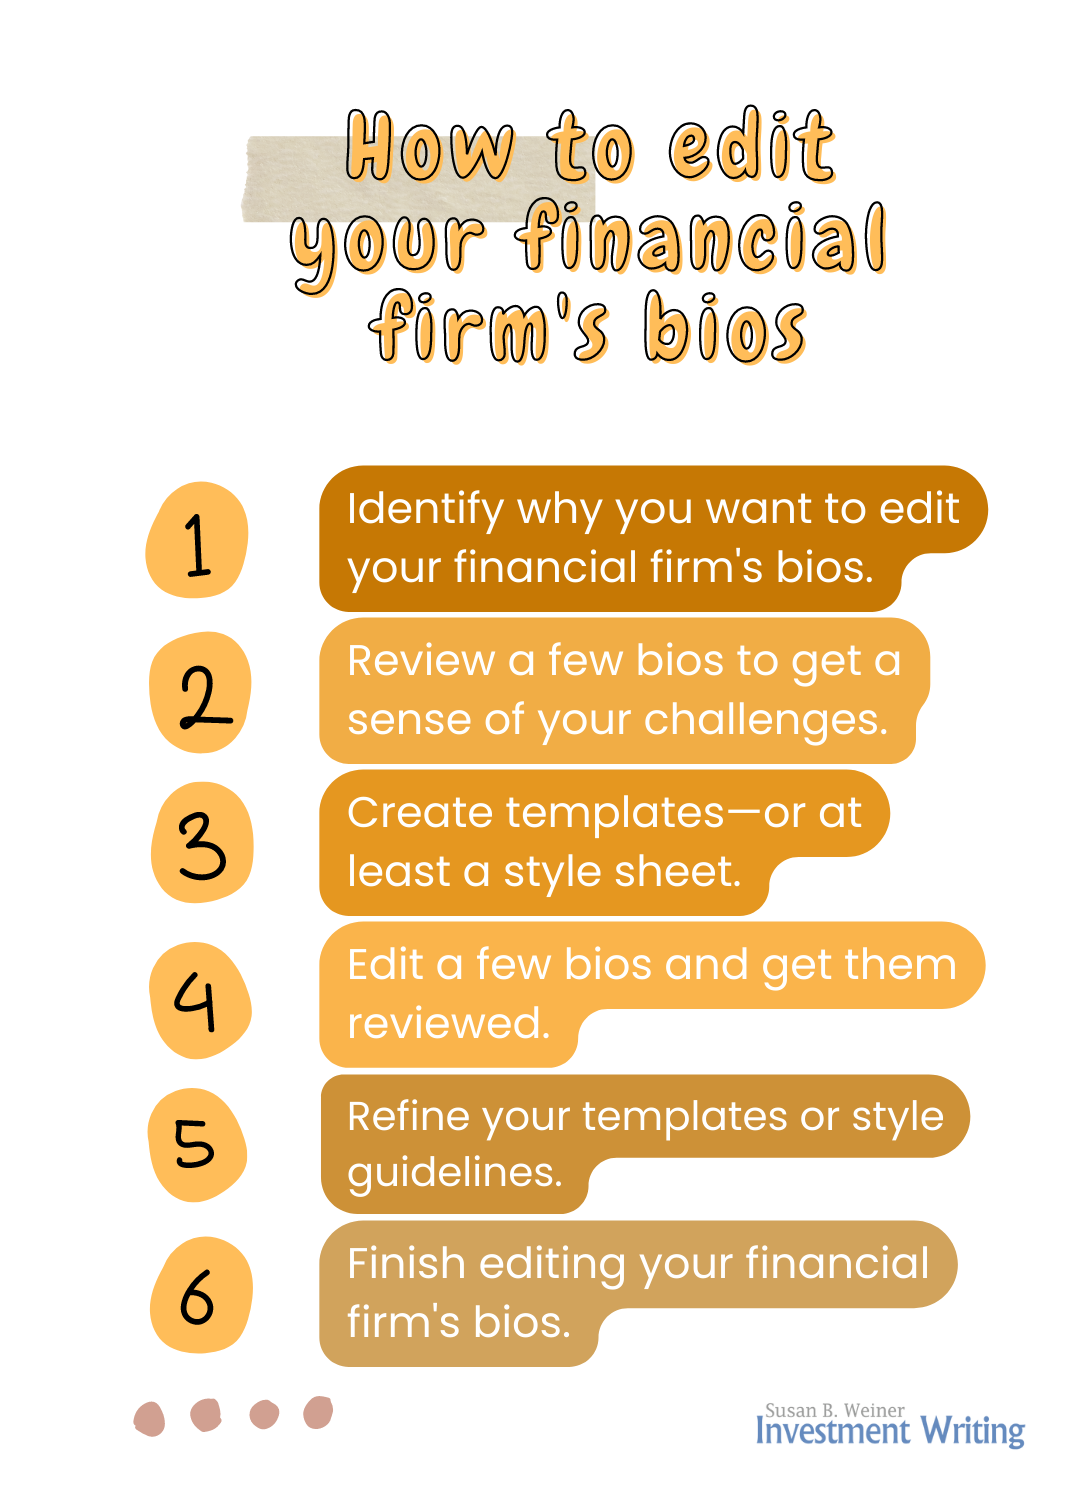 How to edit your financial firm's bios infographic